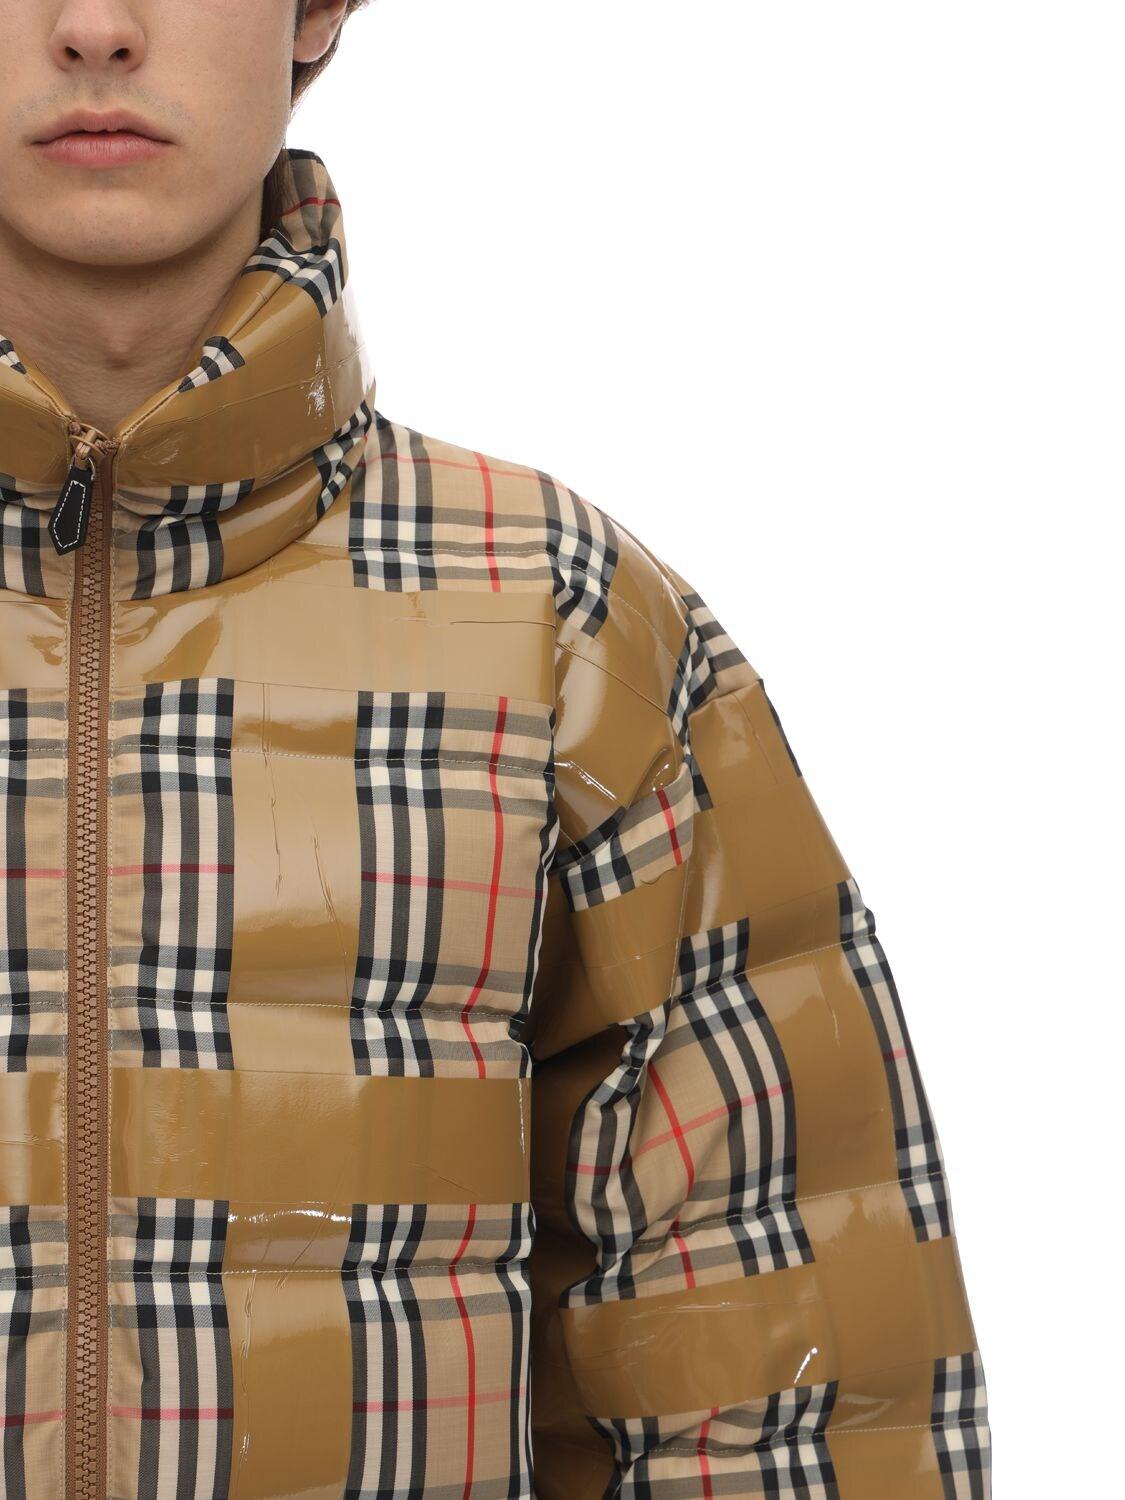 Burberry Synthetic Vintage Check Down Jacket in Natural for Men - Lyst